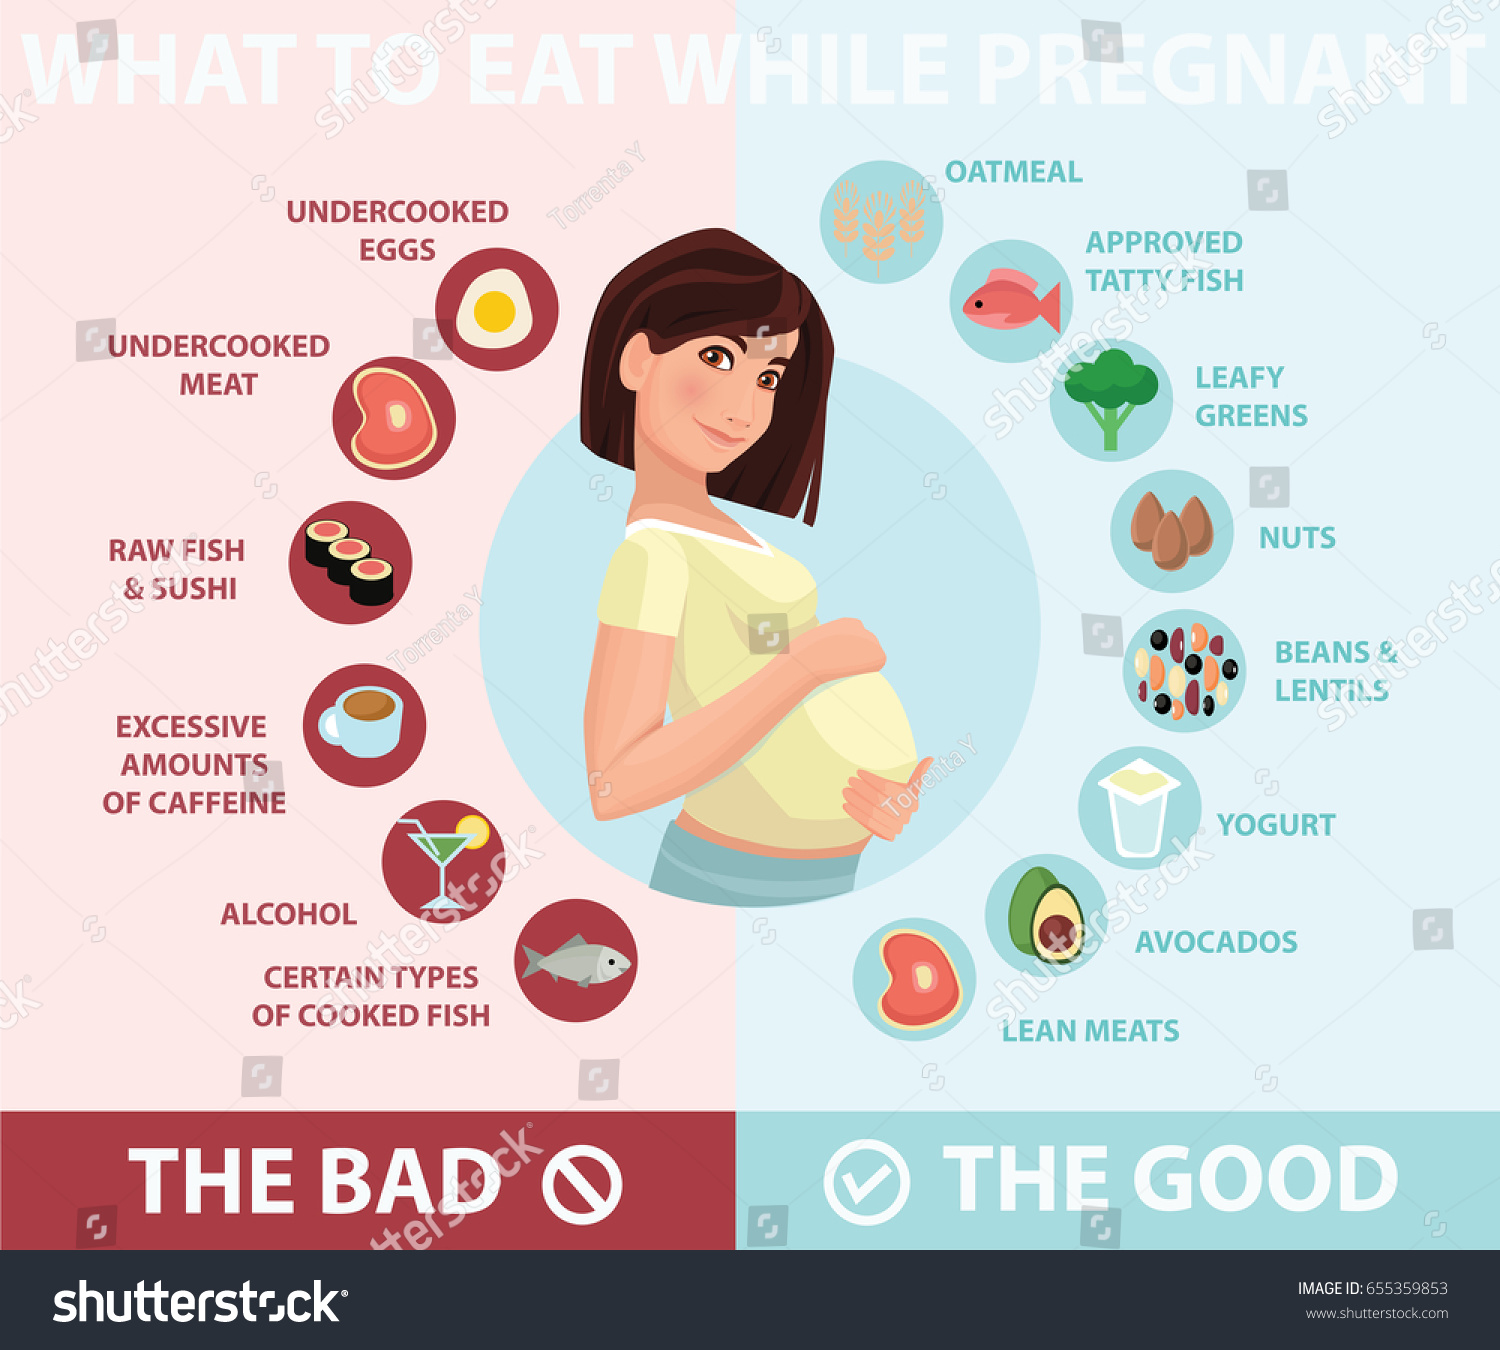 stock-vector-pregnant-woman-diet-infographic-a-food-guide-for-pregnant-woman-pregnant-diet-healthy-lifestyle-655359853.jpg